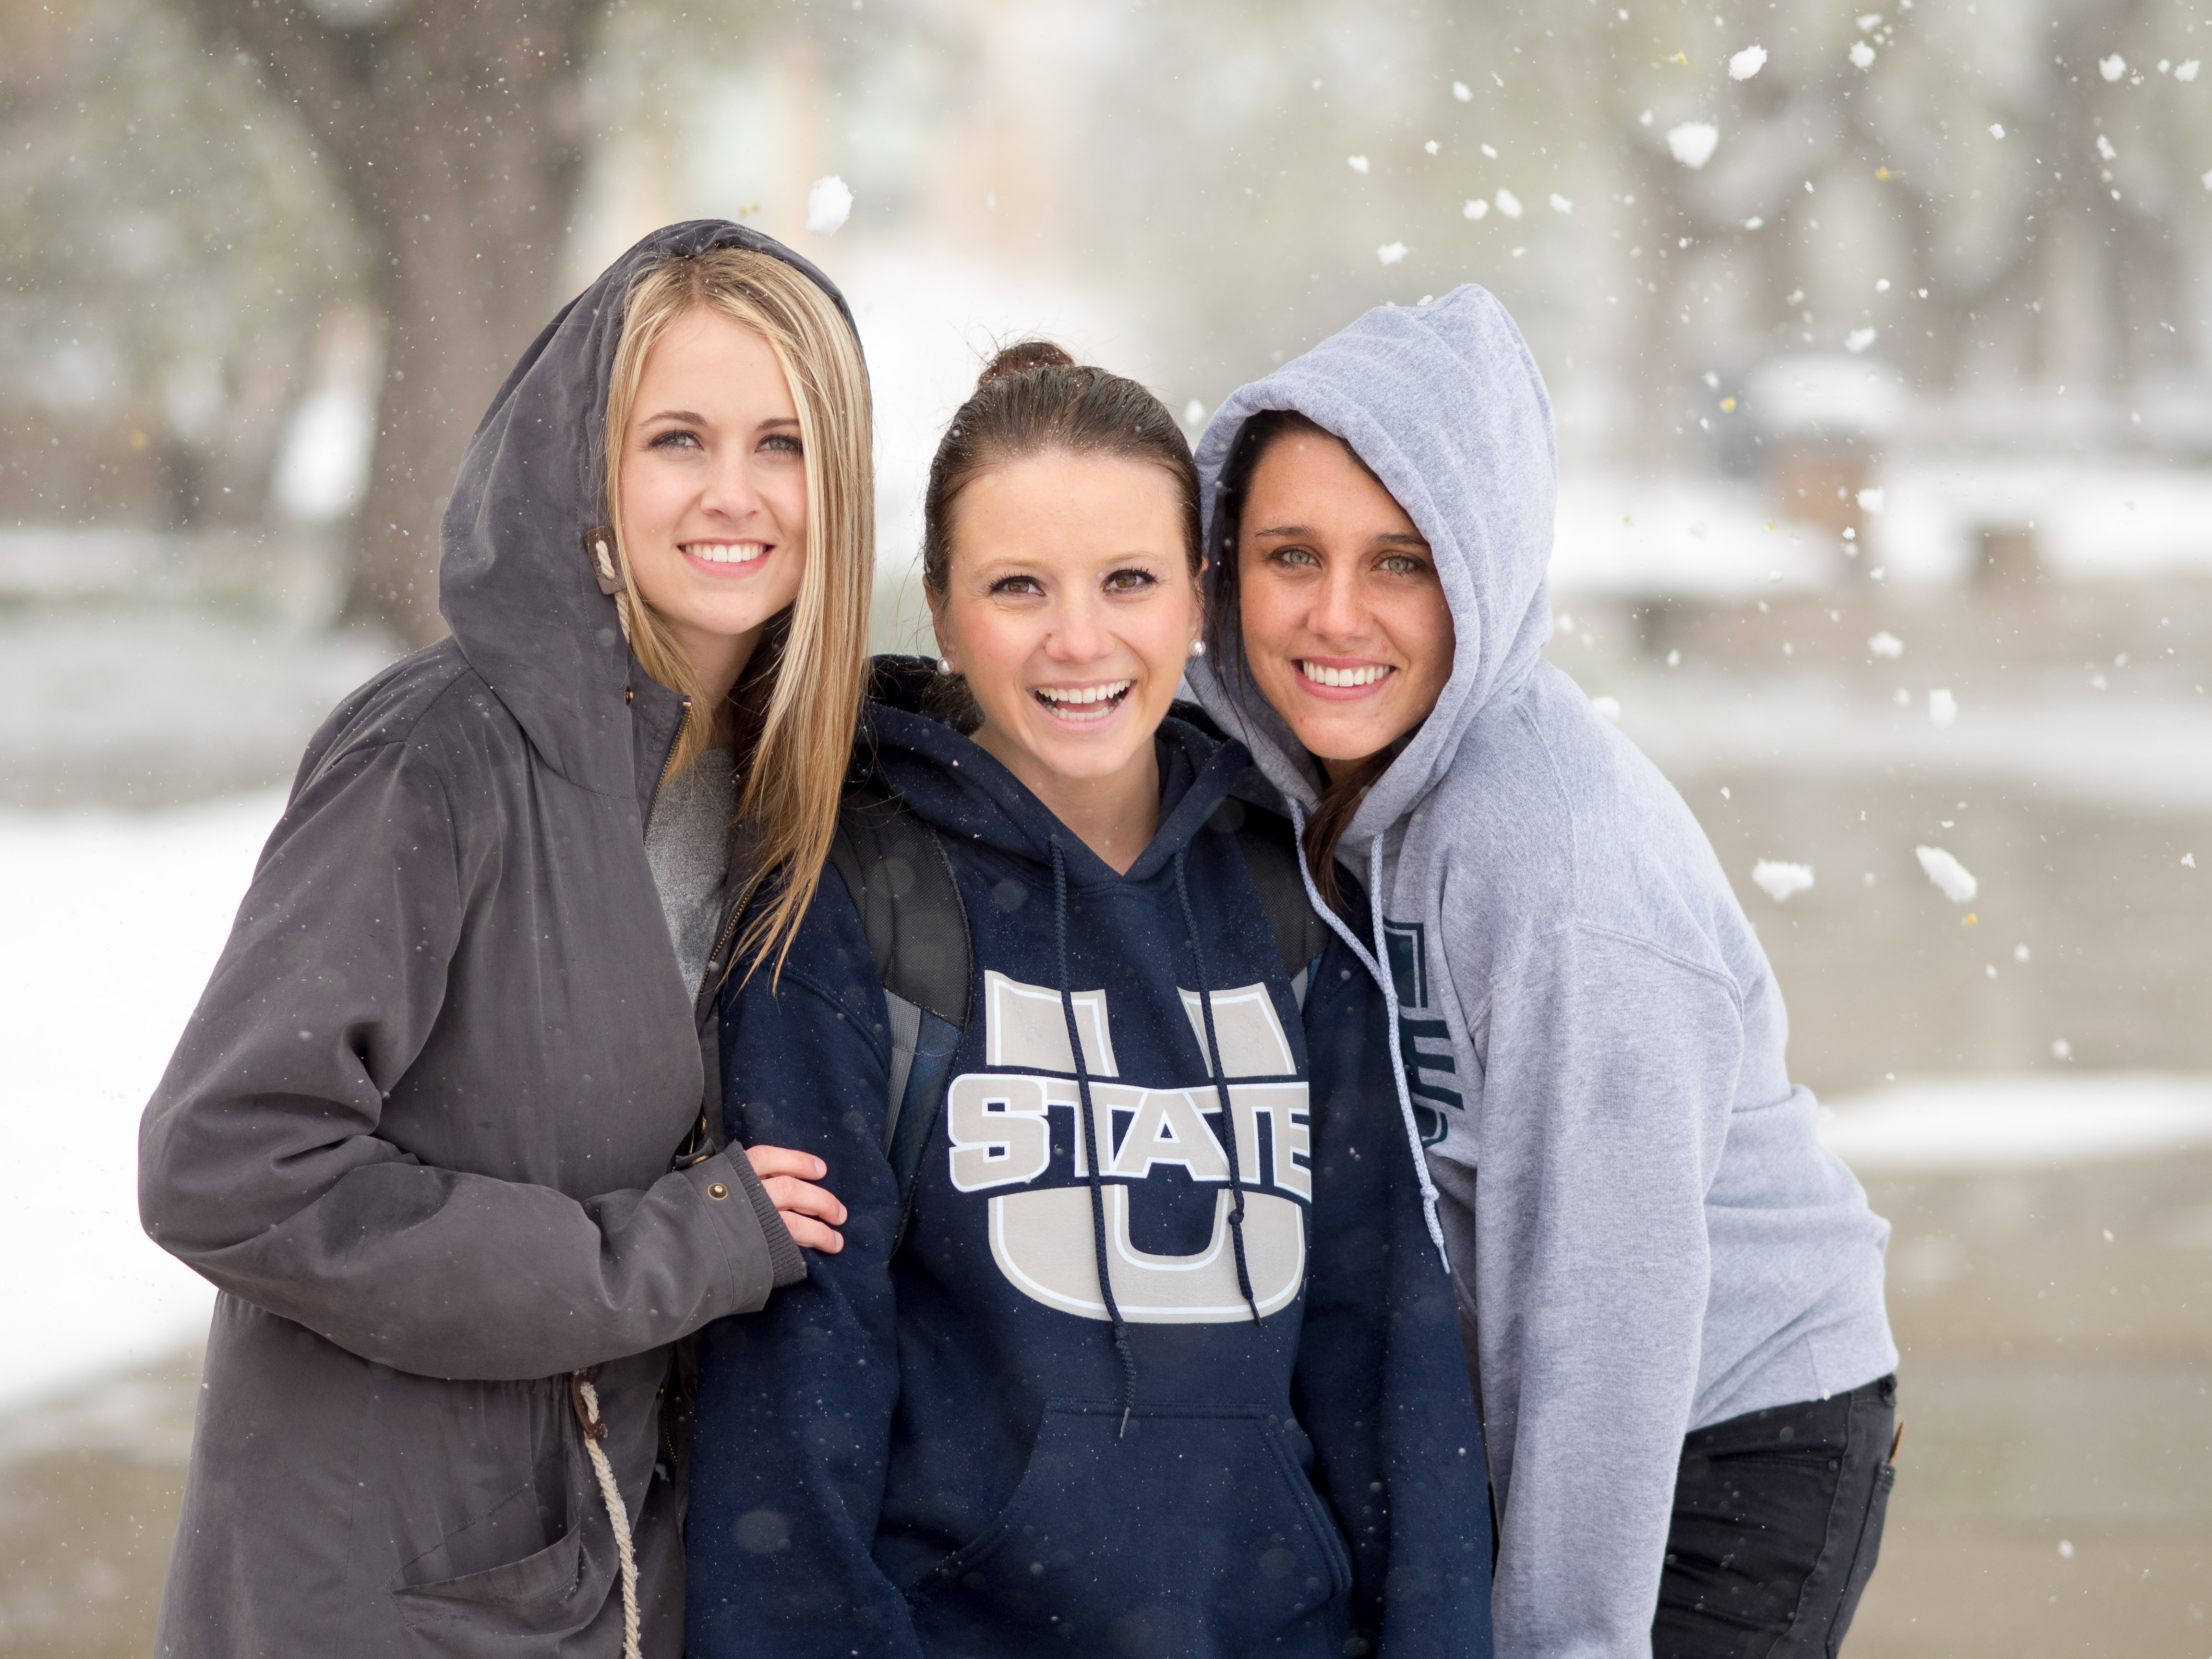 Students in the snow